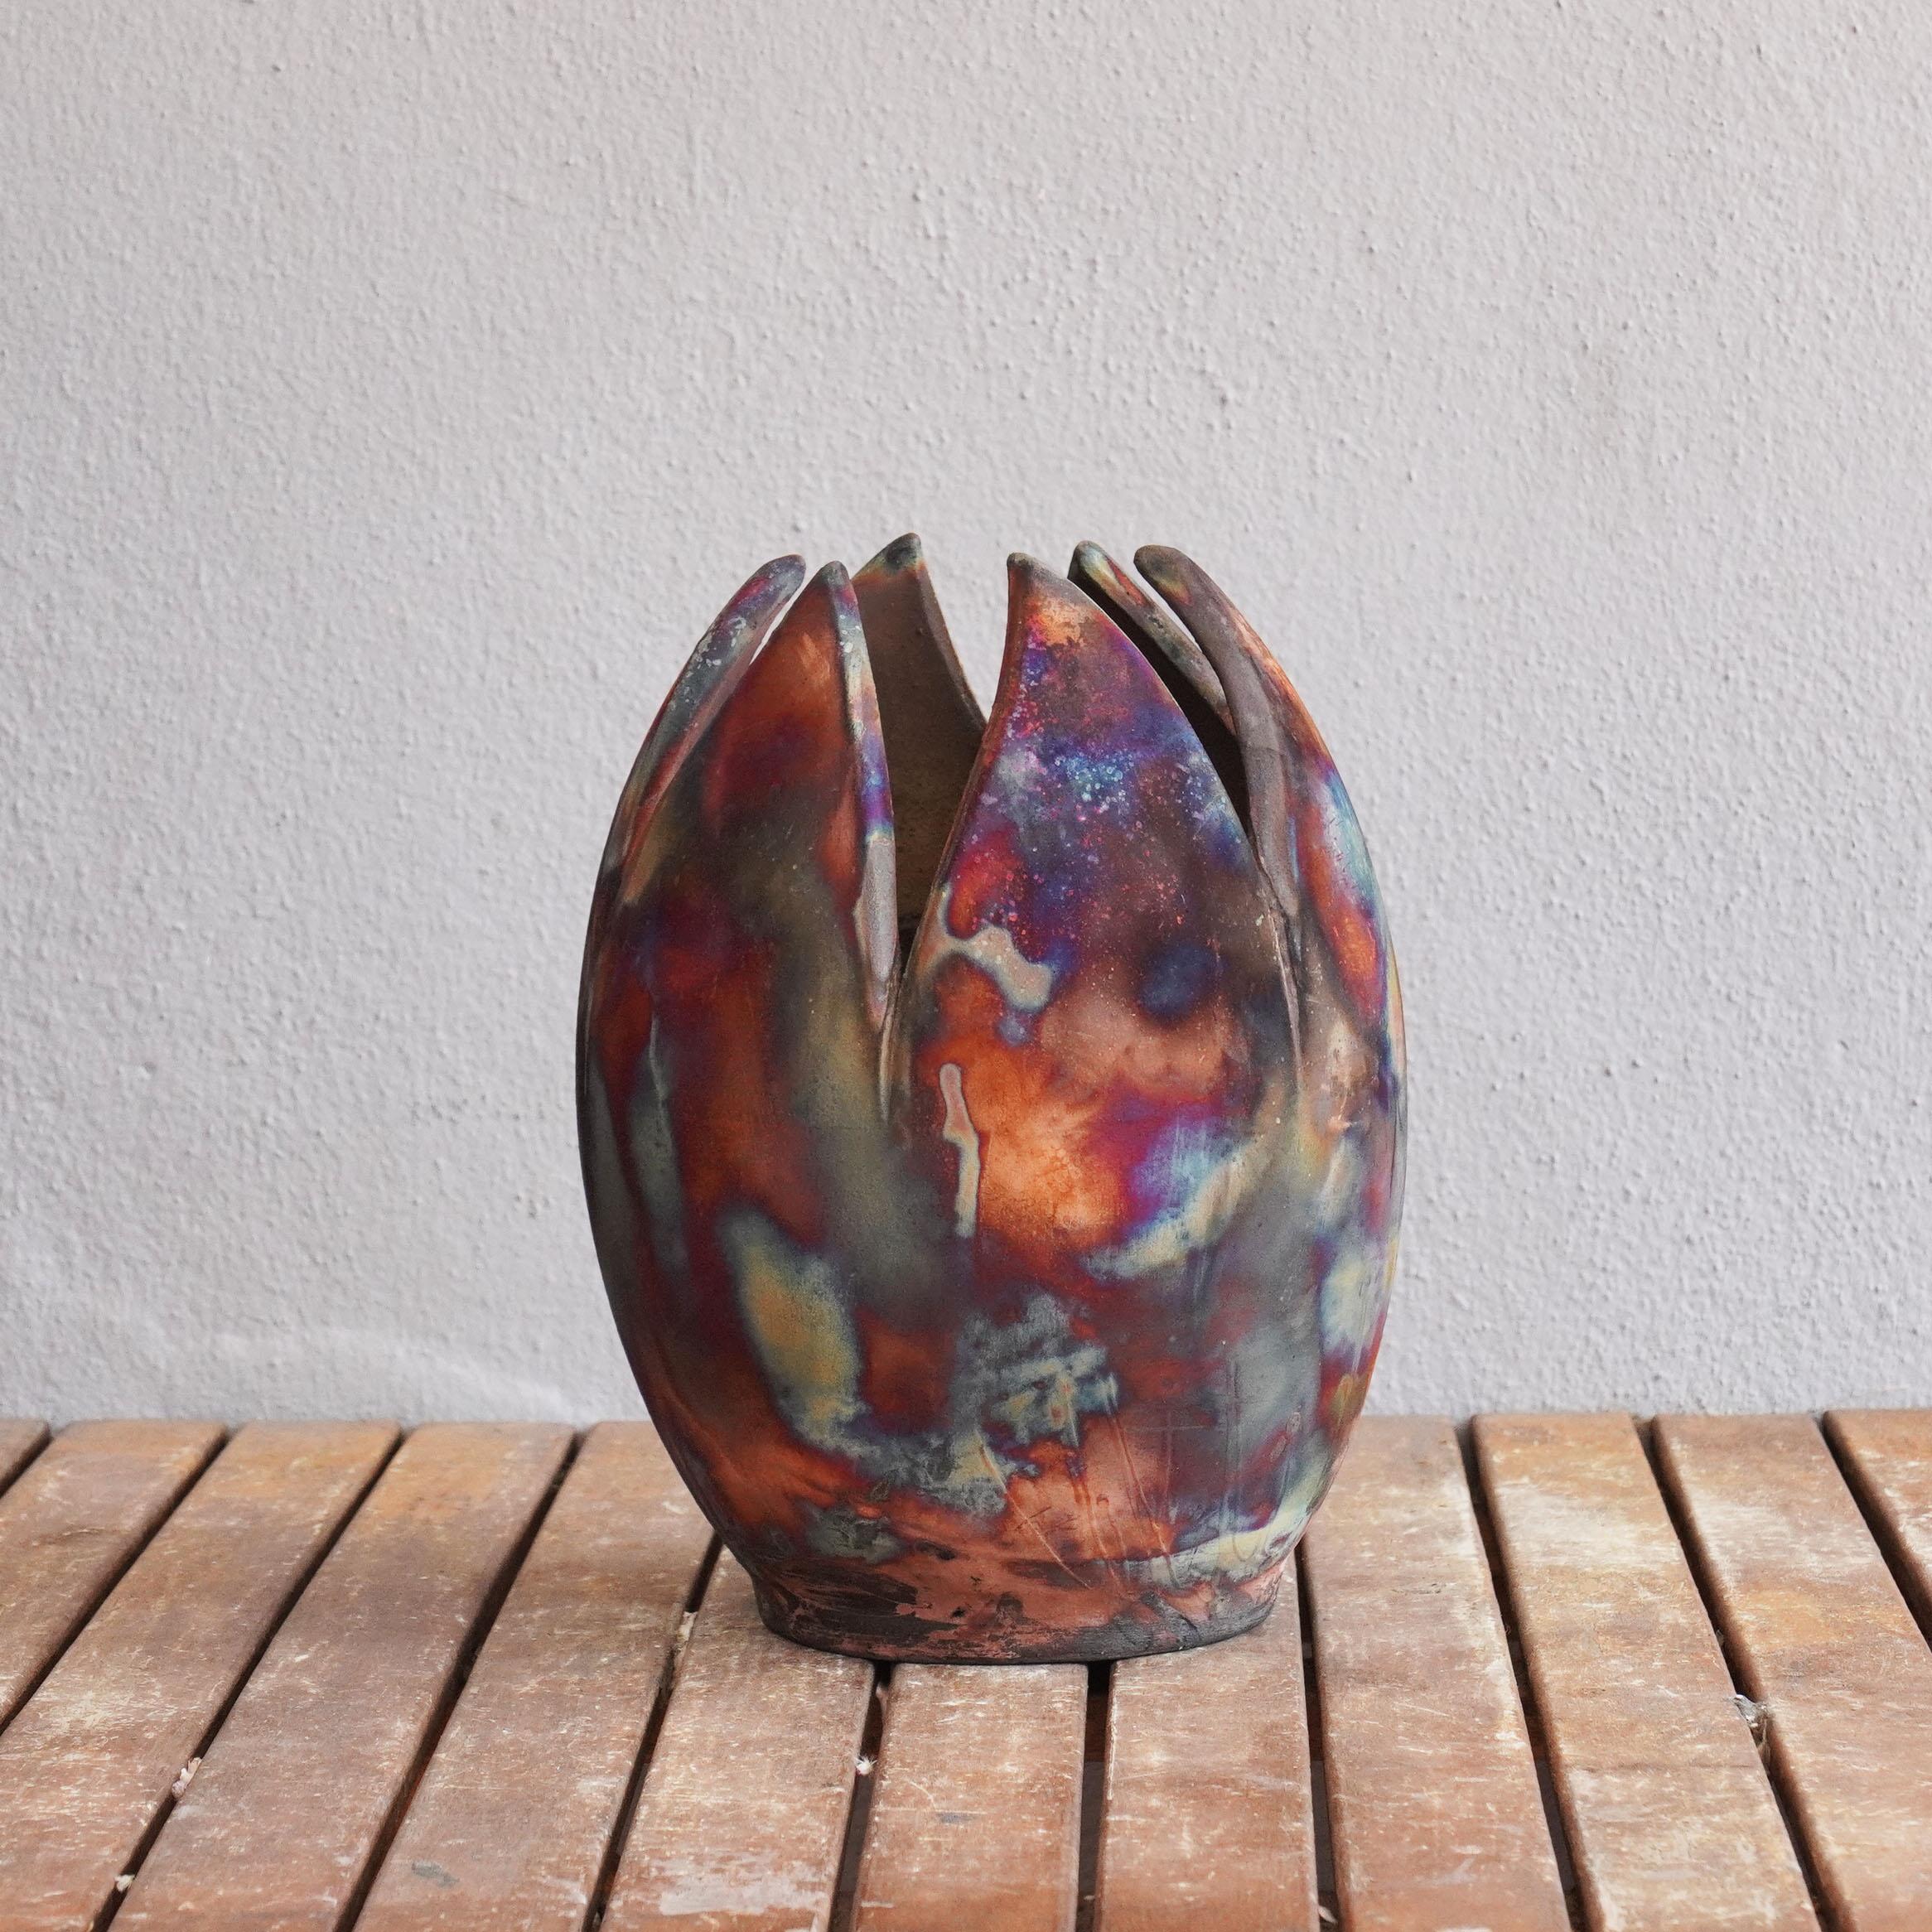 With a shape inspired from the tulip flower, the RAAQUU flower vase expresses a wonderful rainbow sheen on a 6 half petal top oval shaped vase. This vase requires precise forming and is my most complicated shape so far.

The final vase will be of